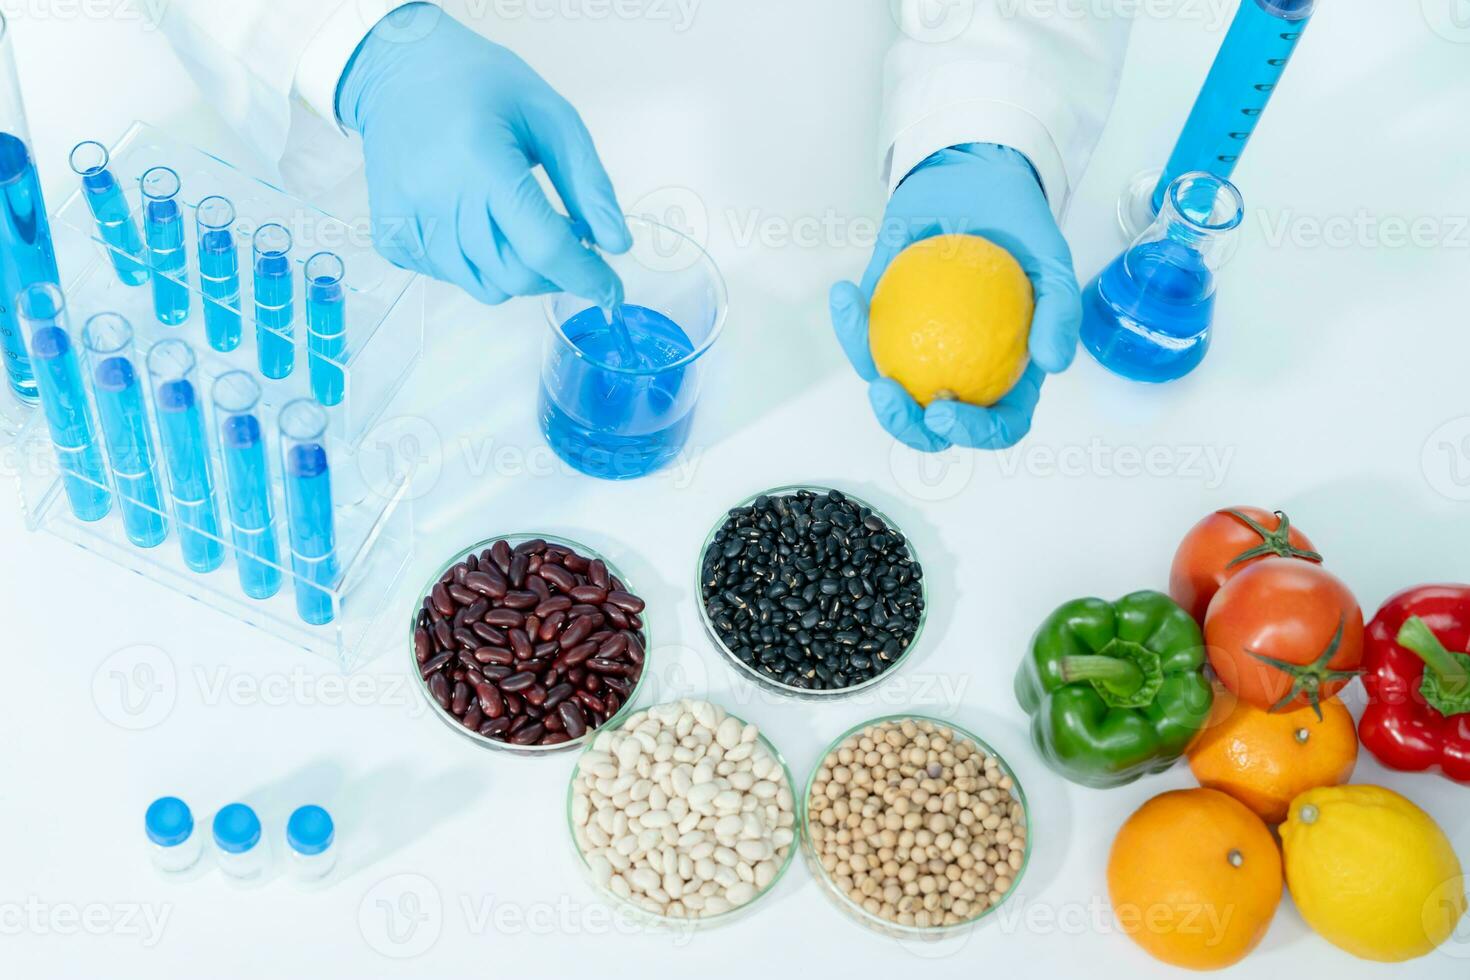 Scientist check chemical food residues in laboratory. Control experts inspect the concentration of chemical residues. hazards, ROHs standard, find prohibited substances, contaminate, Microbiologist photo